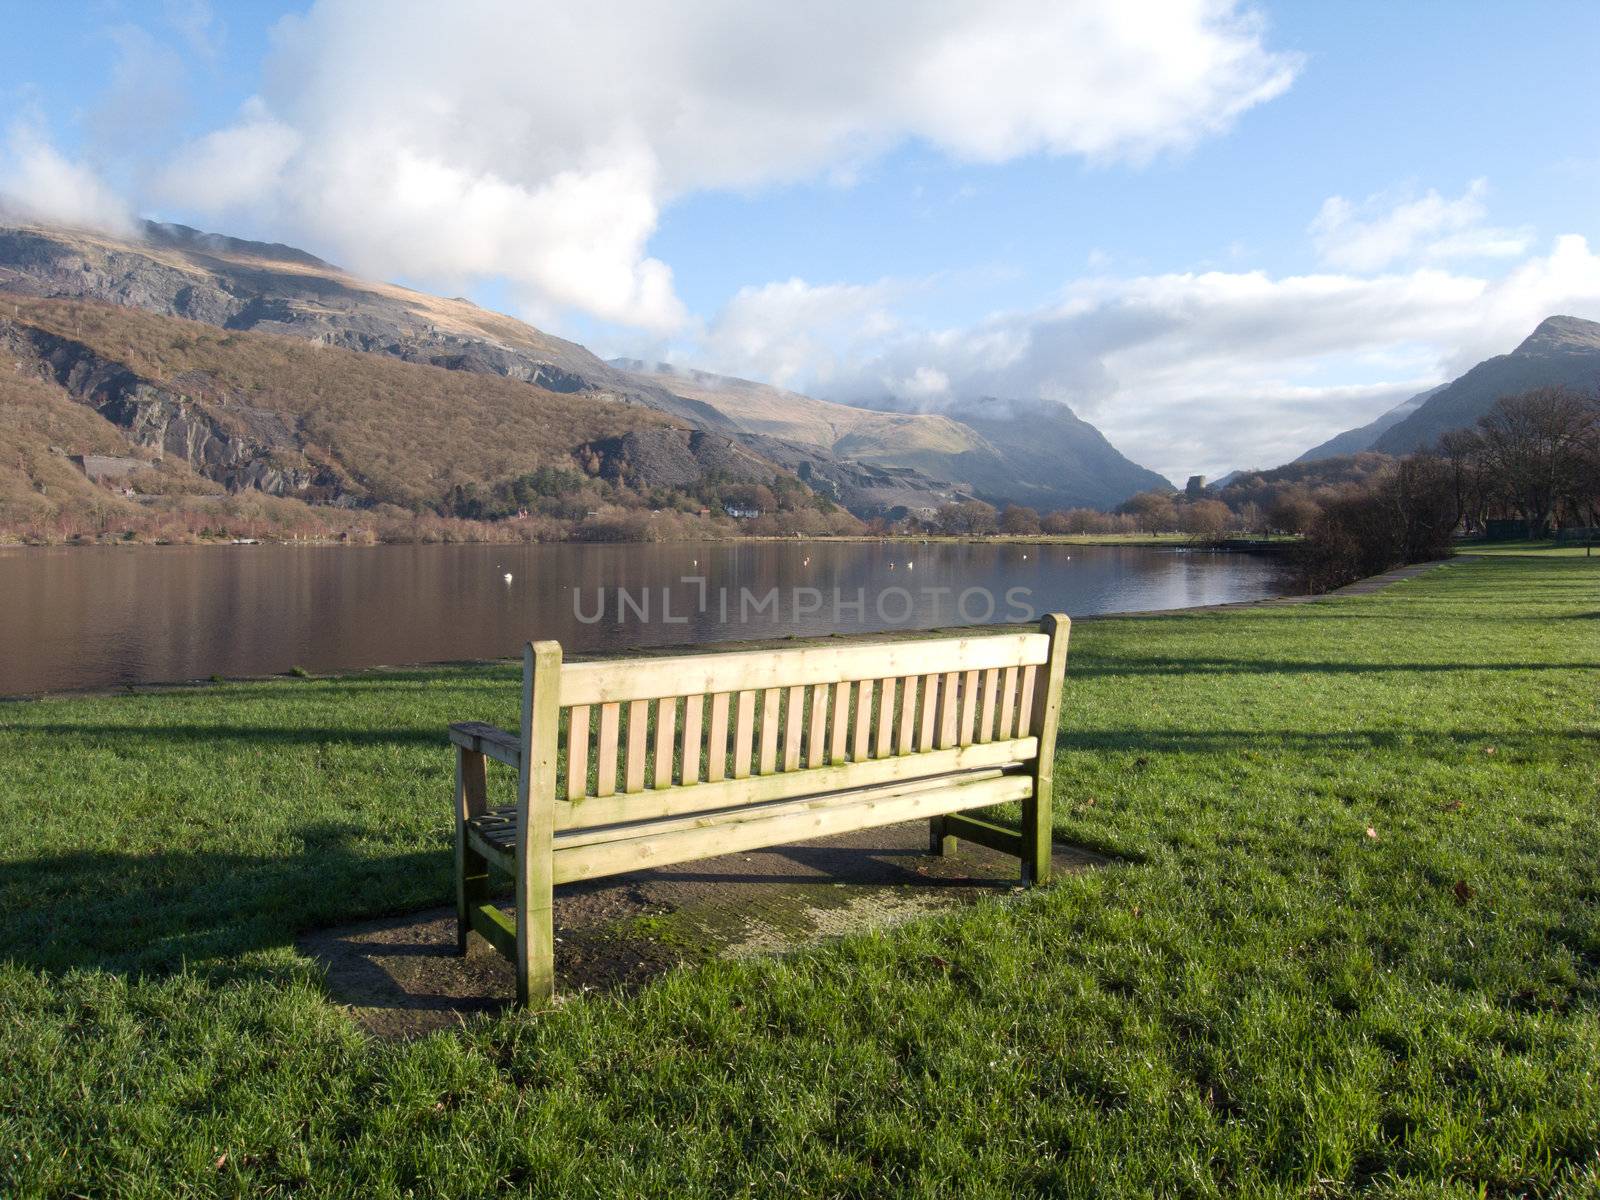 A wooden bench on green grass next to lake Padarn with a view of mountains in the Snowdonia national park, Wales, UK.